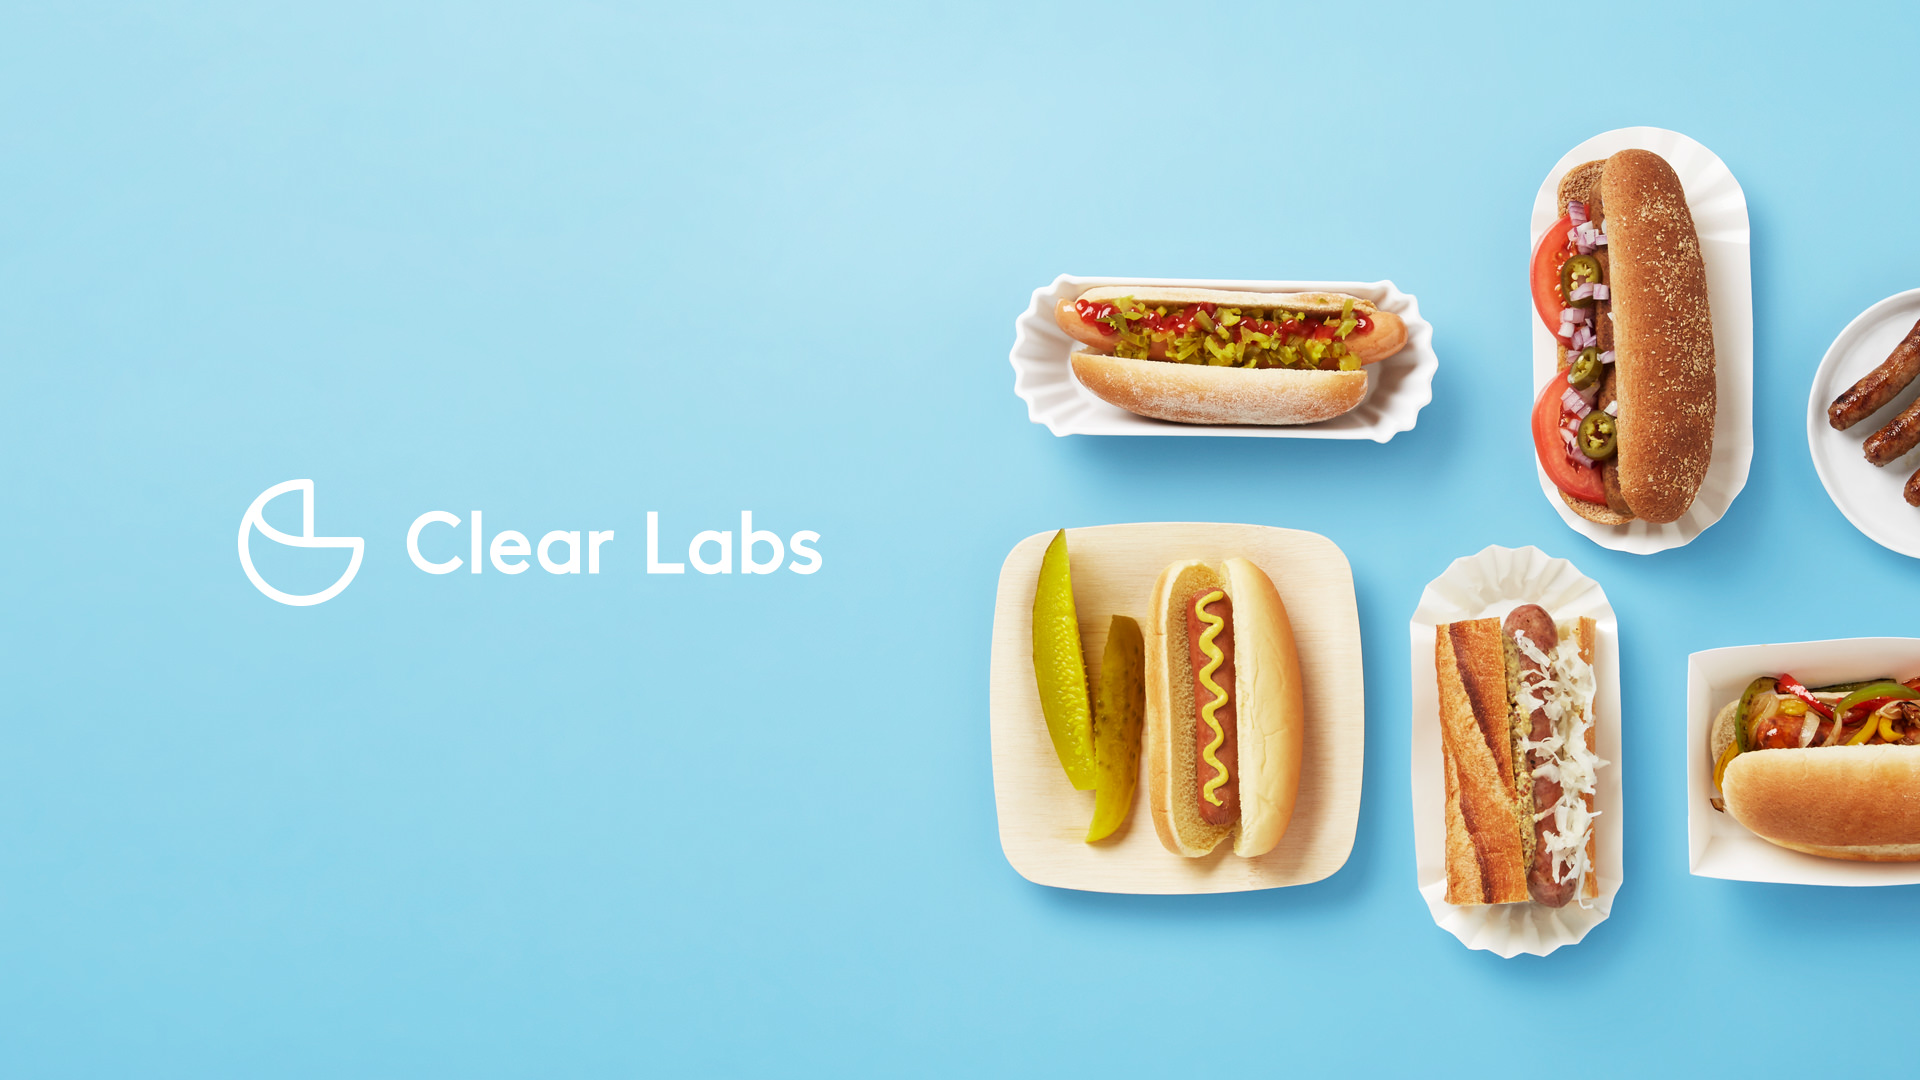 Clear Labs Invests in Deterring Food Born Illnesses